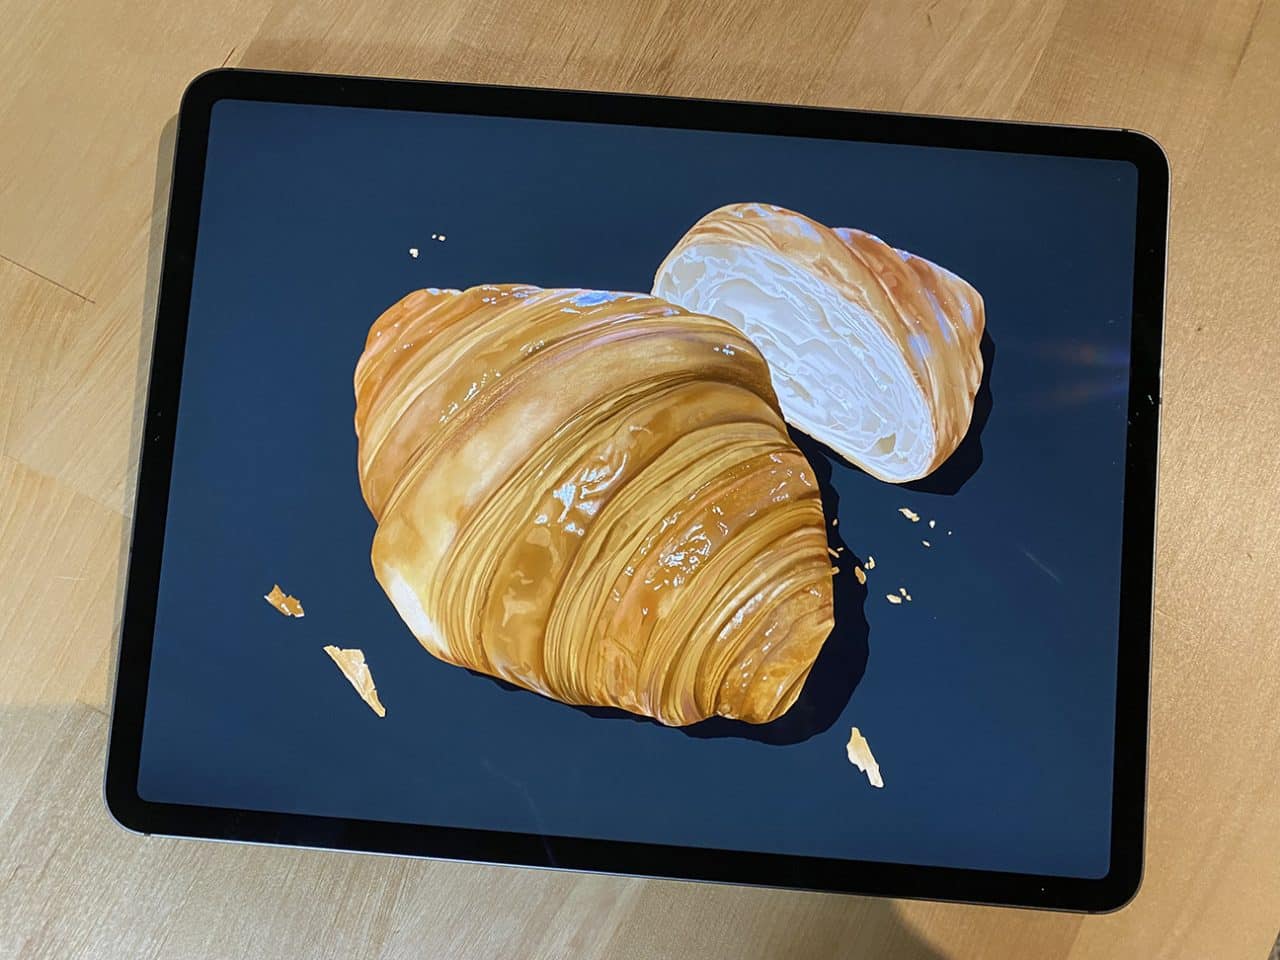 Learn the process of creating a digital croissant drawing with Procreate on iPad Pro.